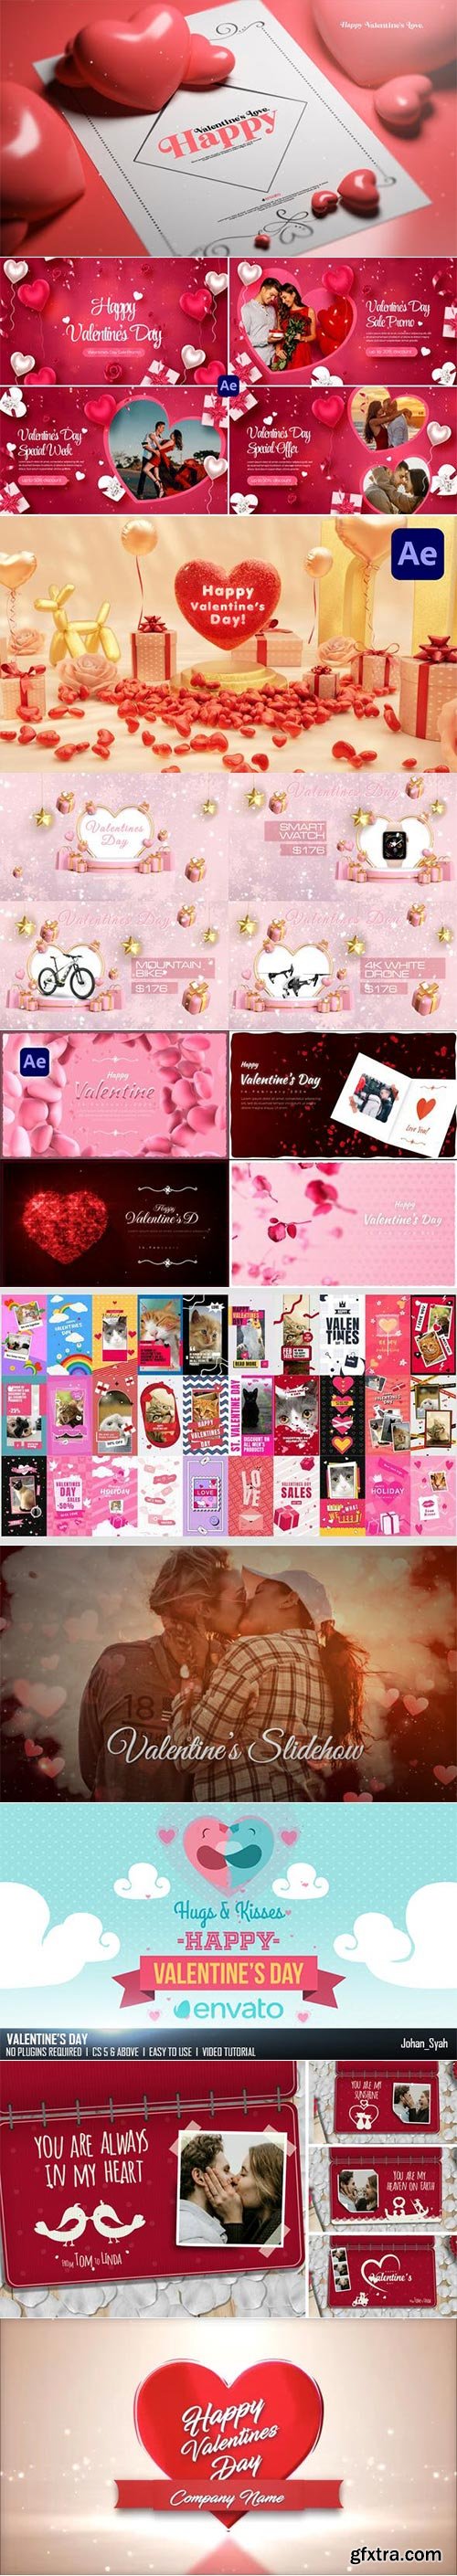 Valentines Day After Effect Project Pack 1